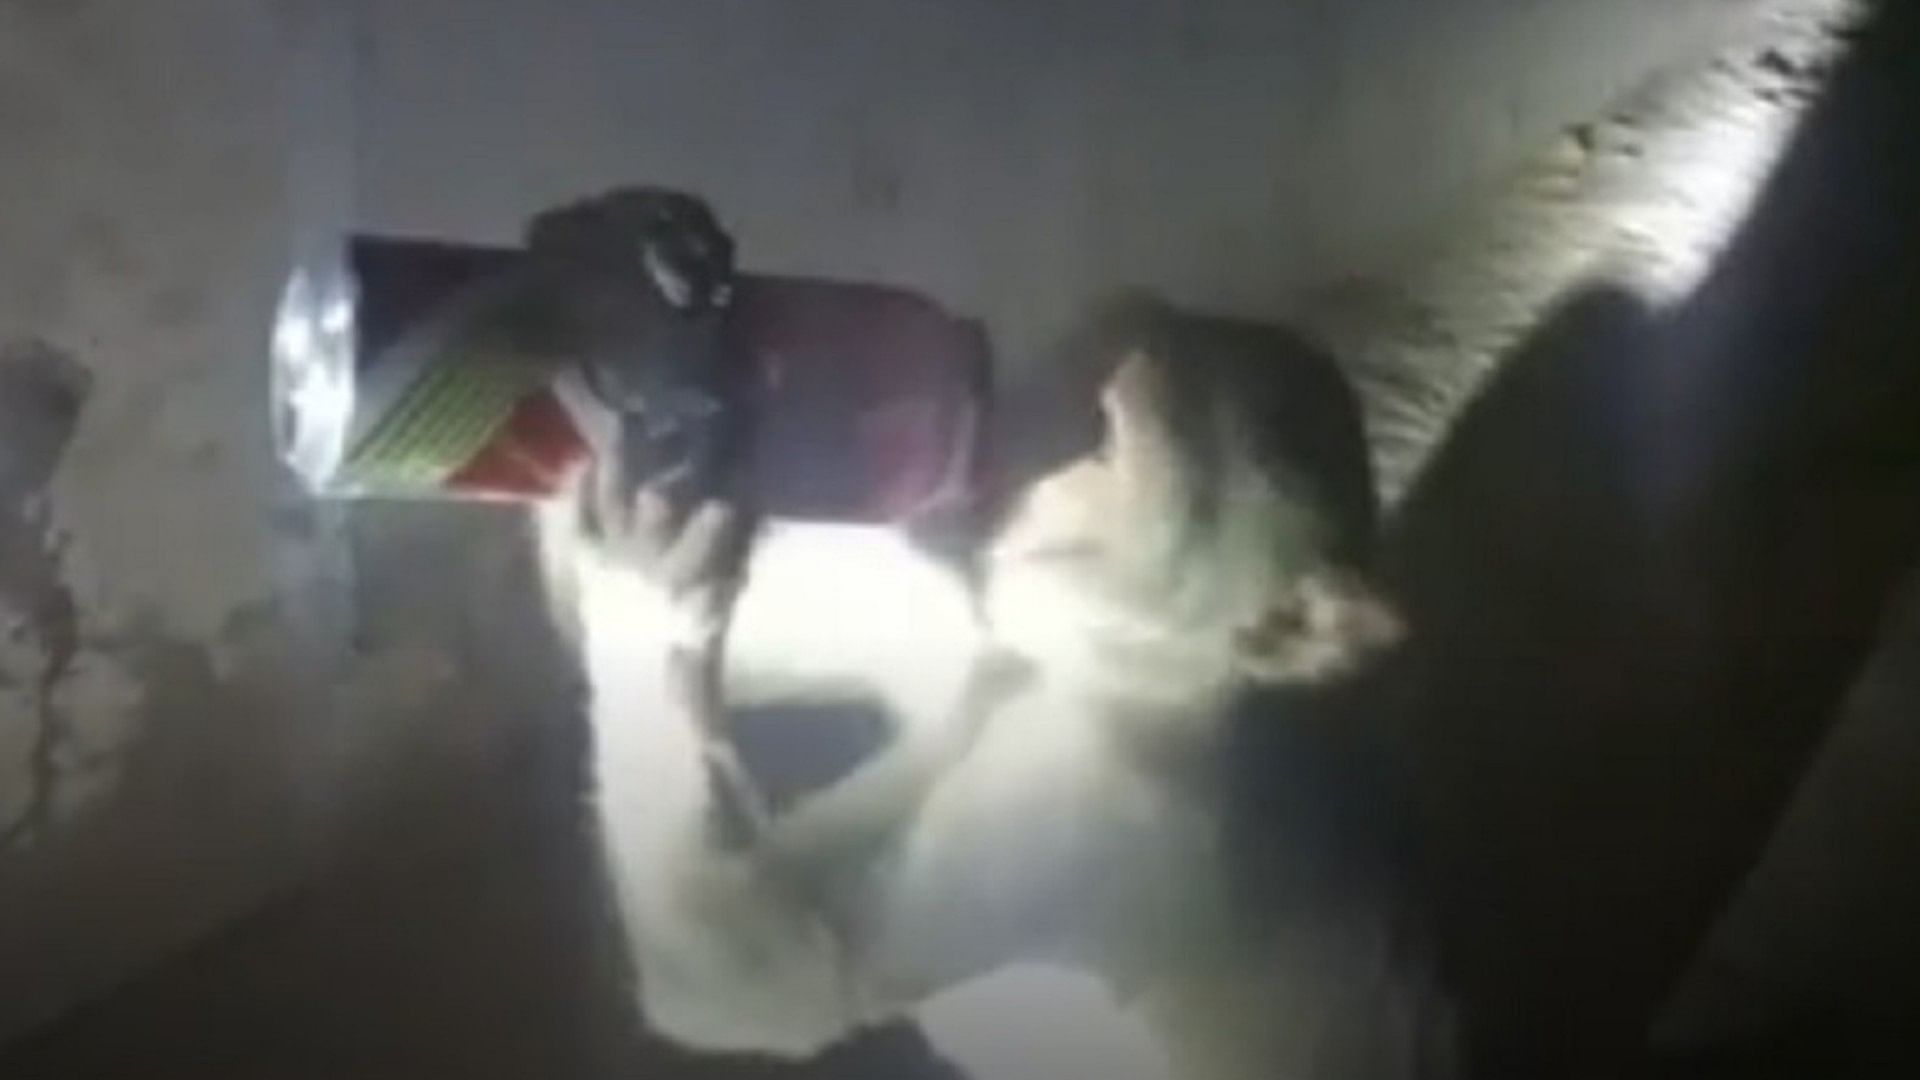 Monkey Drinking Alcohol Viral Video this drunken monkey created trouble for people